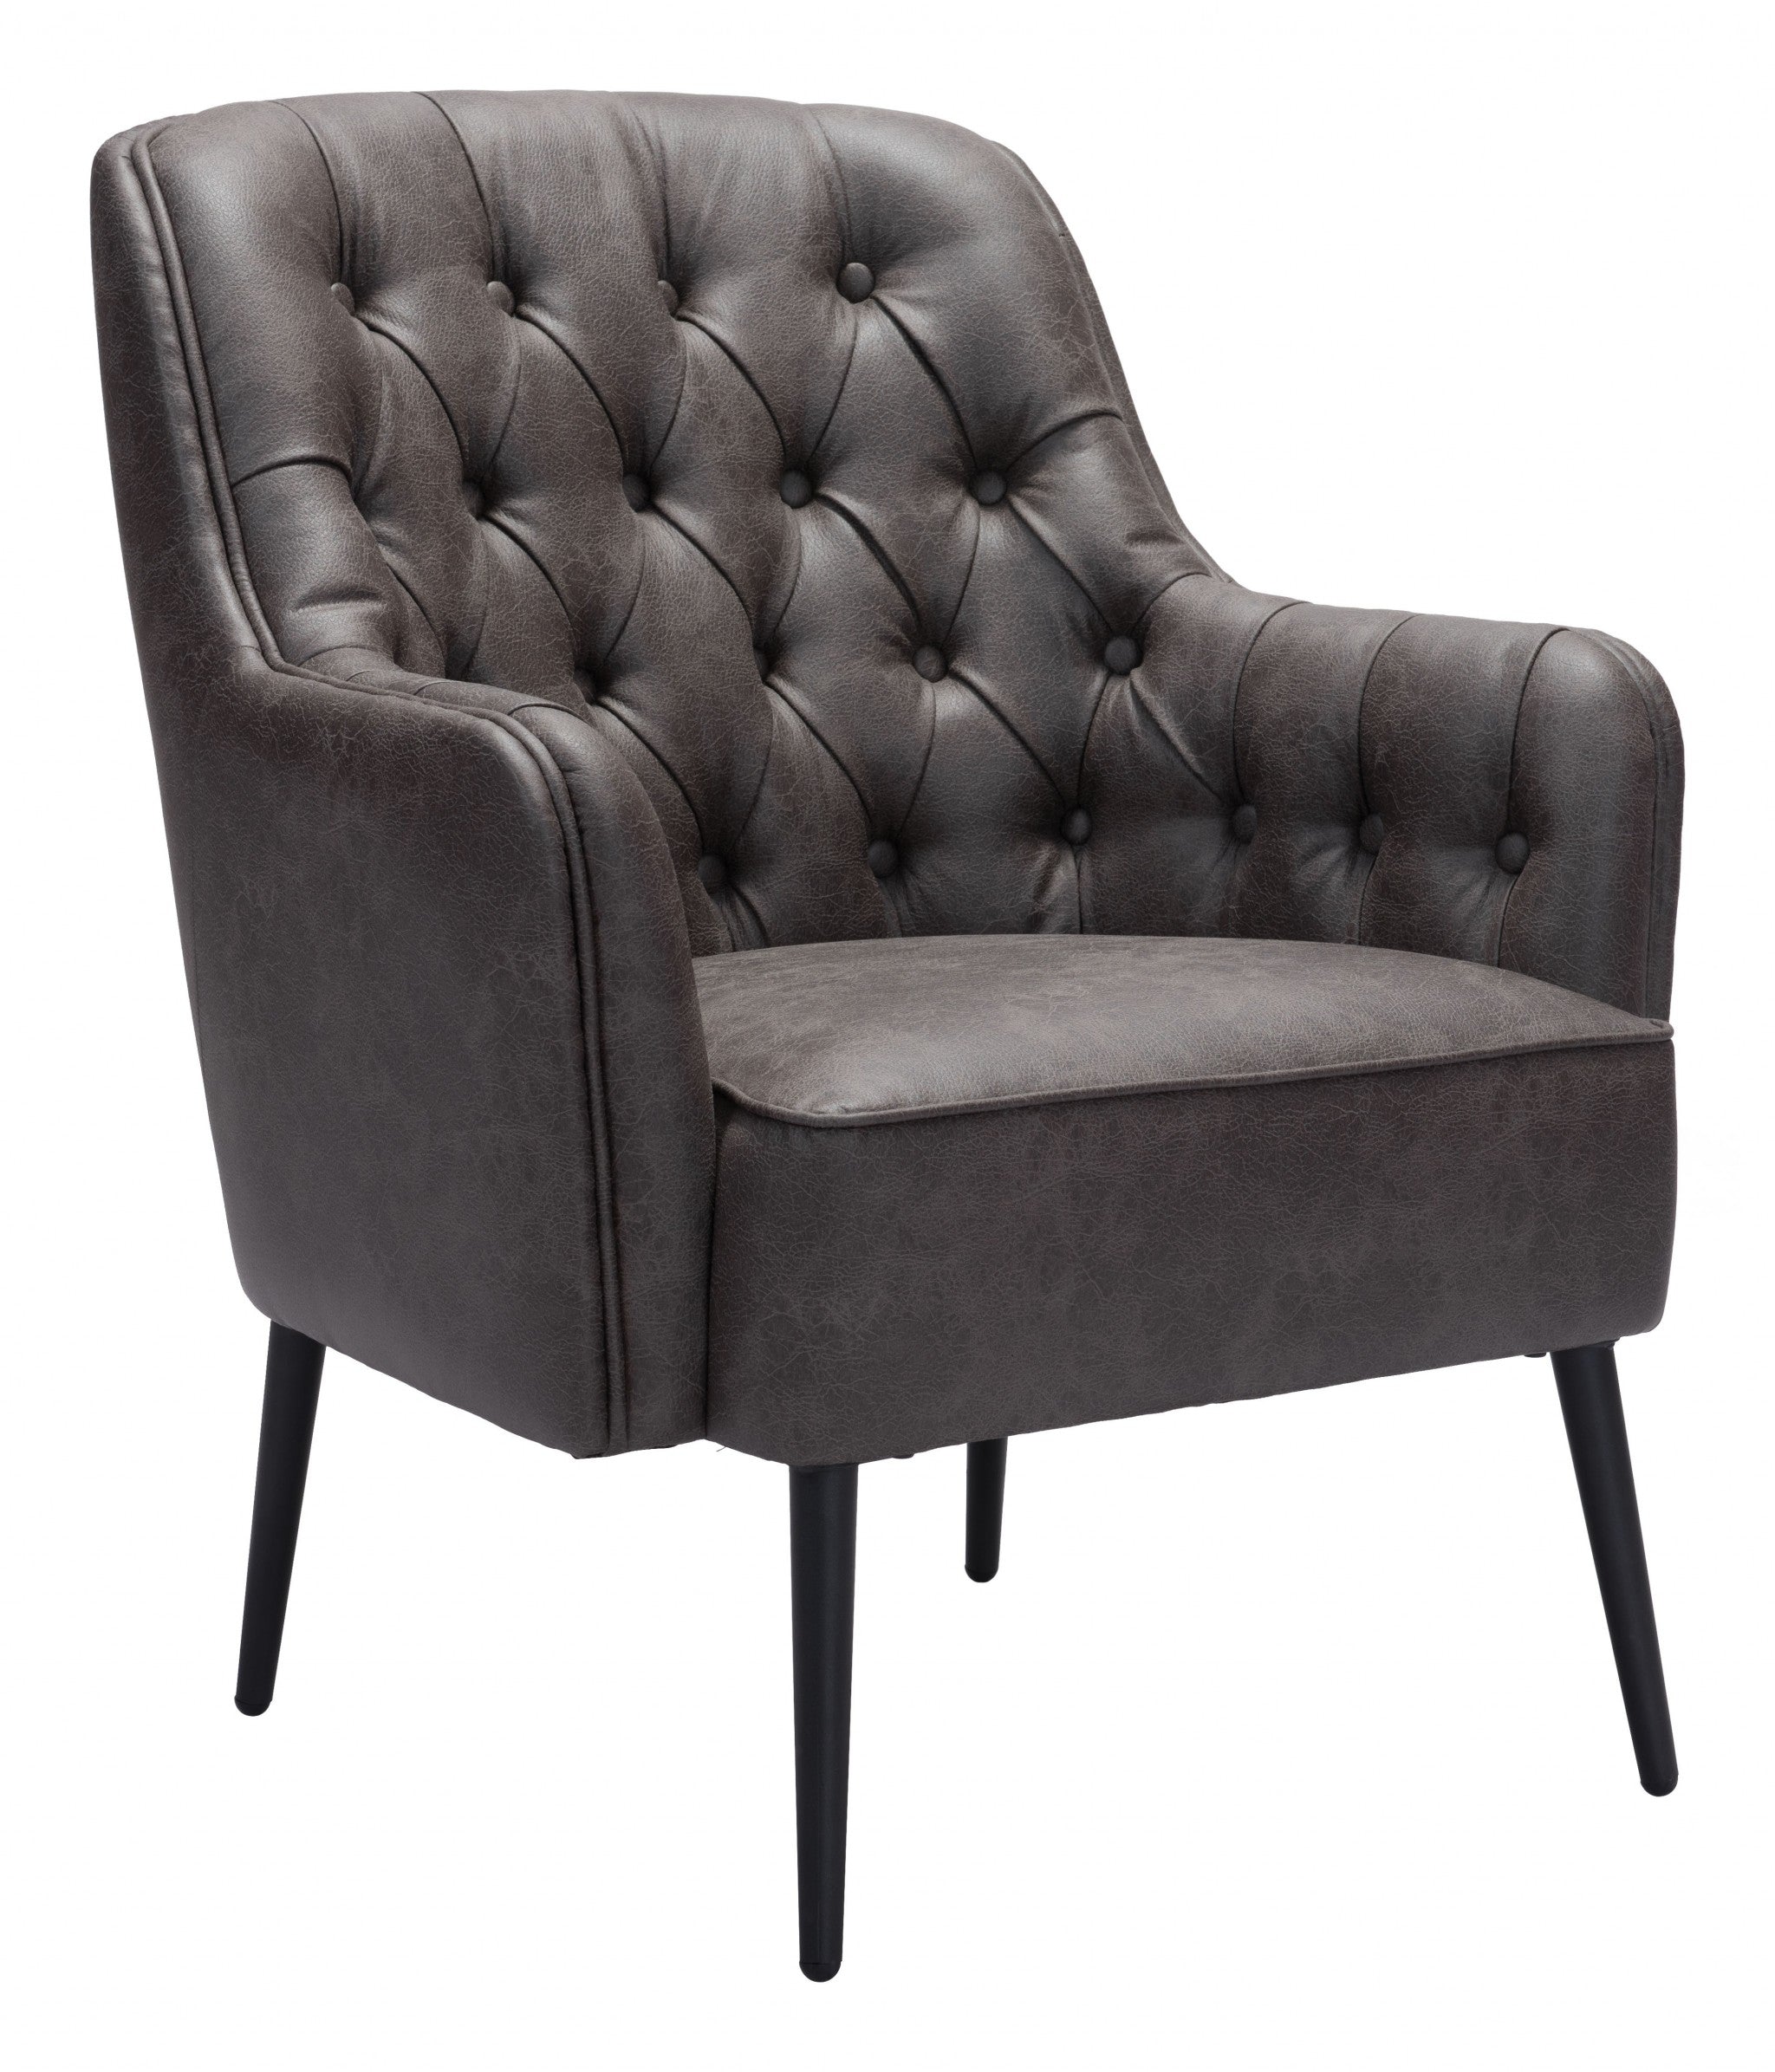 29" Black Faux Leather And Gold Tufted Arm Chair